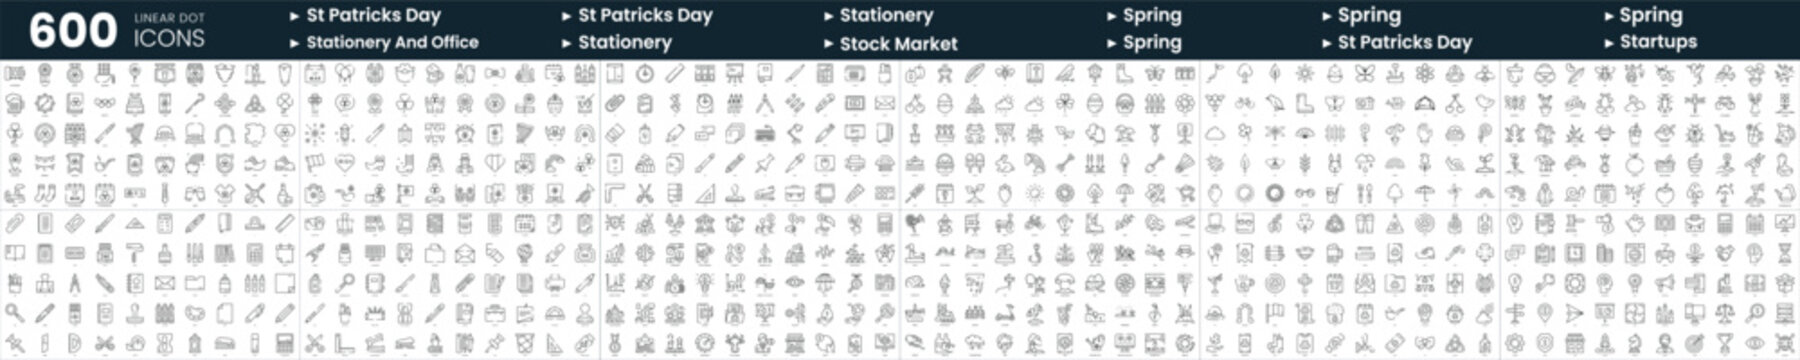 Set of 600 thin line icons. In this bundle include spring, st patricks day, stationery and office, stock market and more